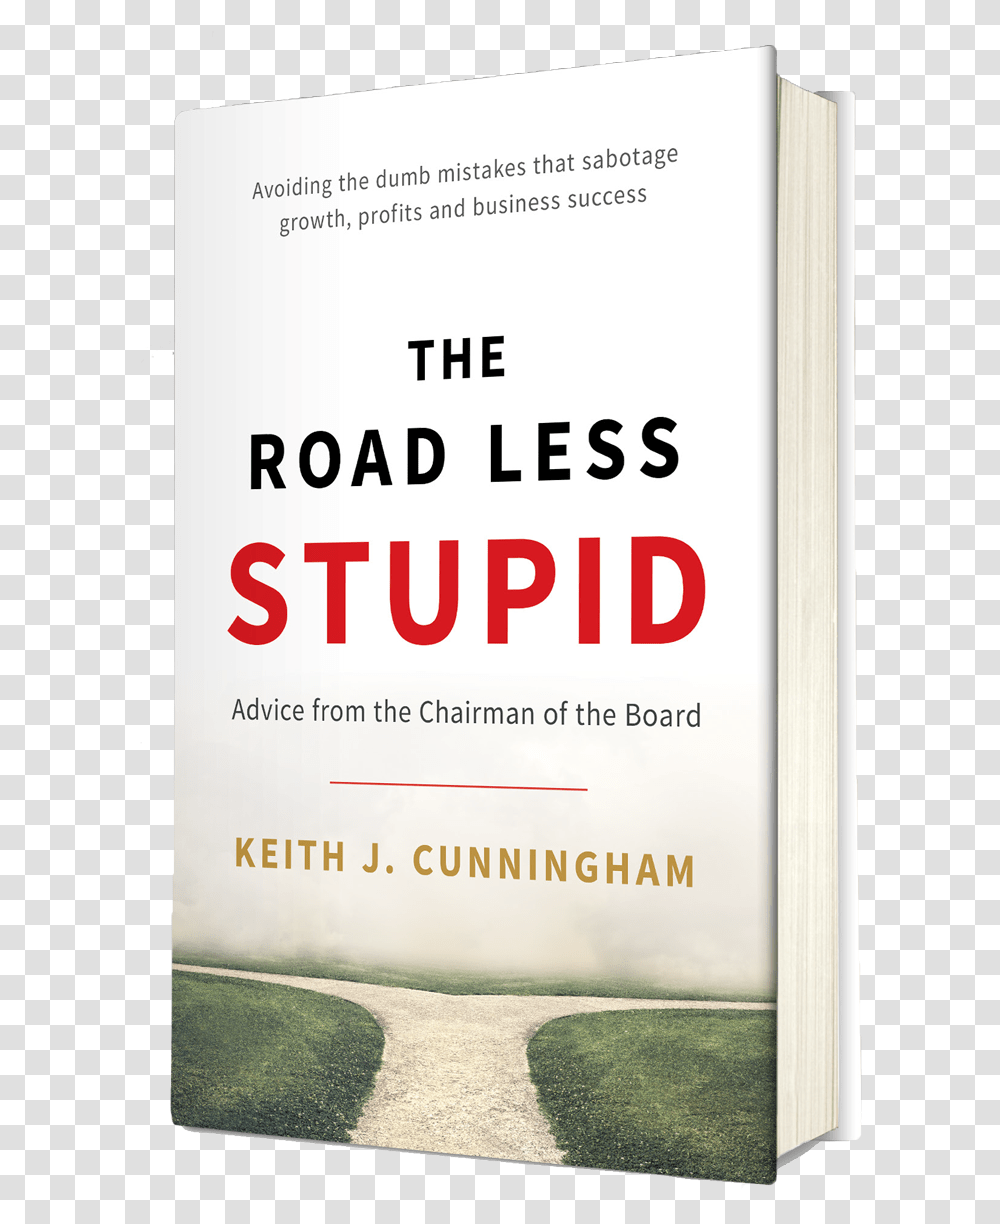 Smart People Do Dumb Things Download Road Less Stupid Pdf, Poster, Advertisement, Flyer Transparent Png